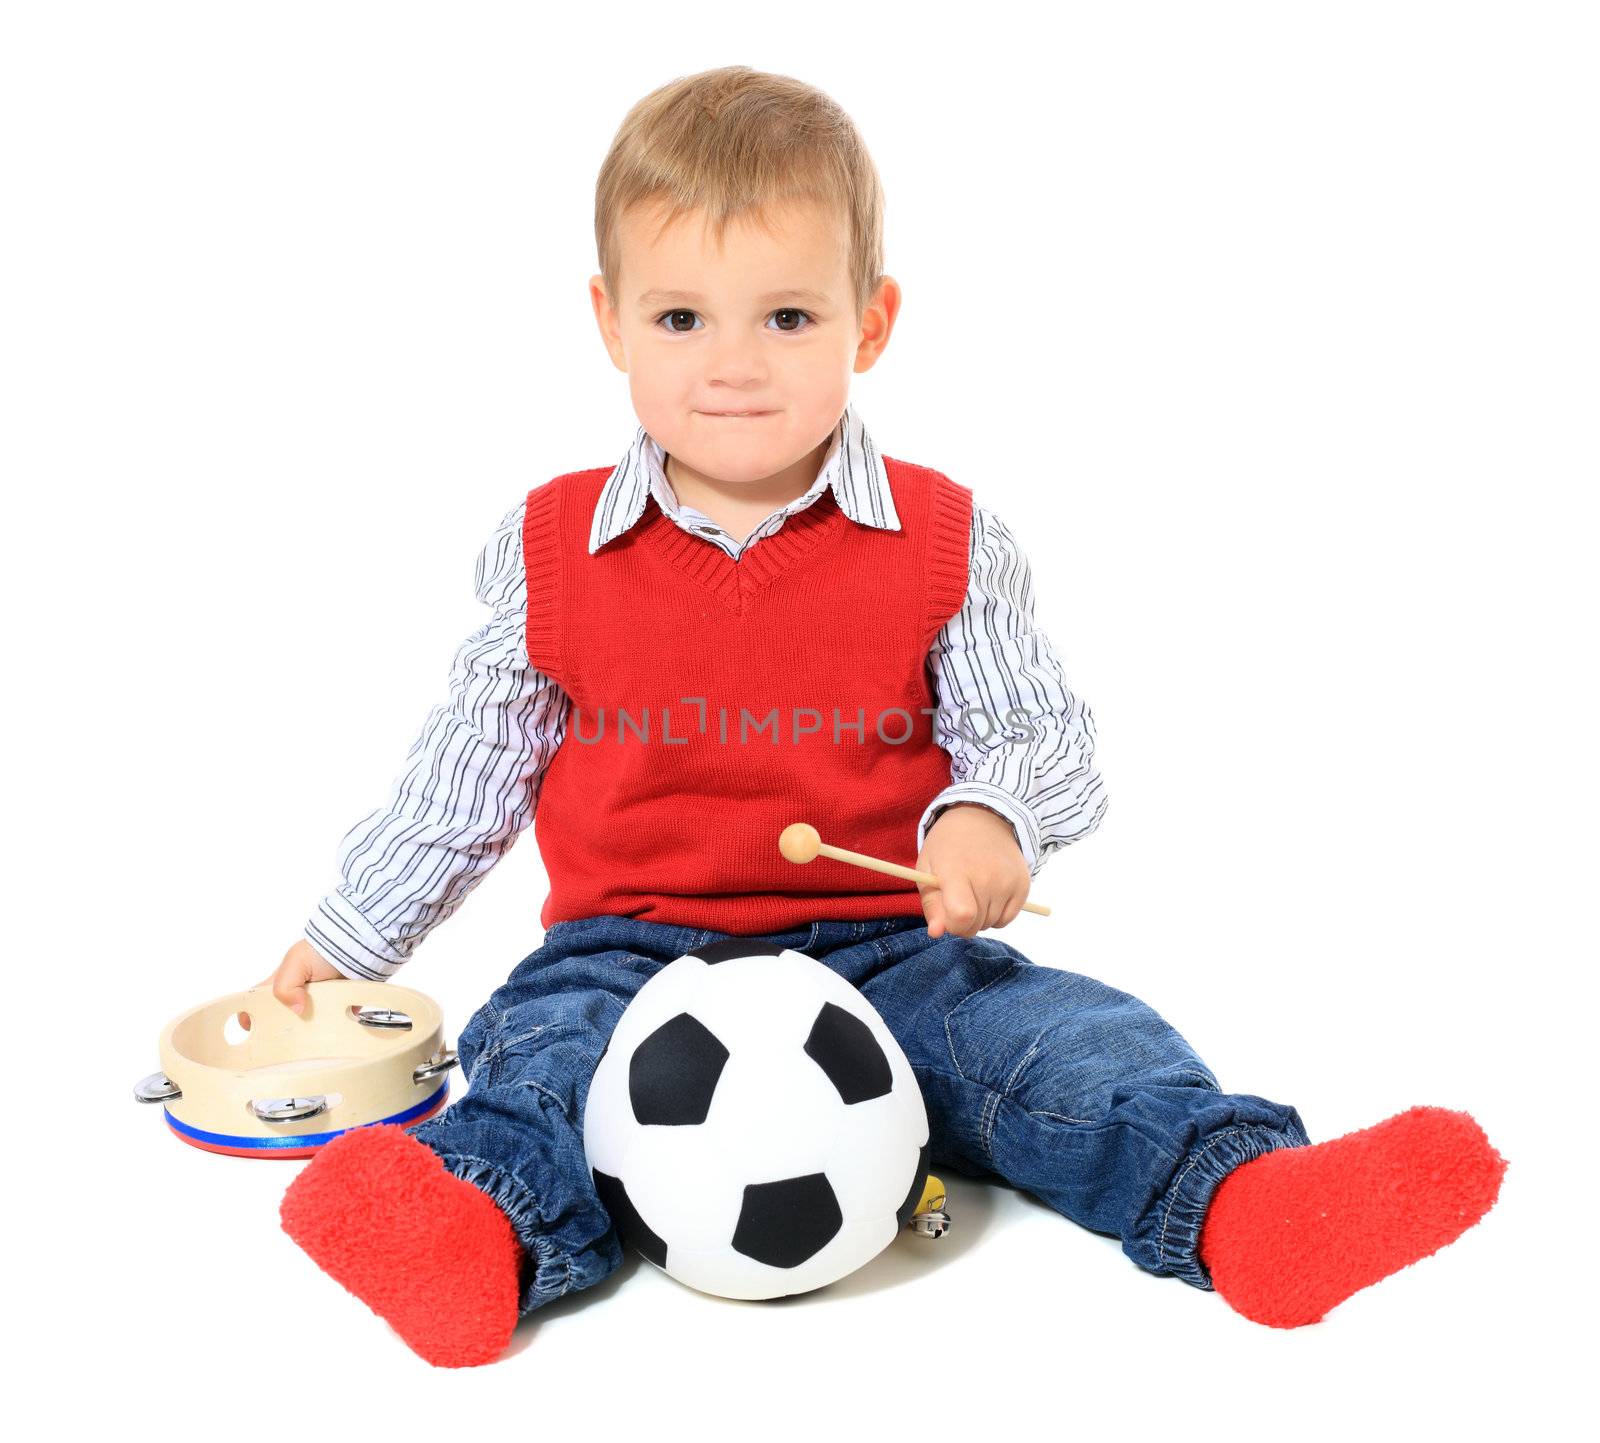 Cute caucasian toddler having fun. All isolated on white background.